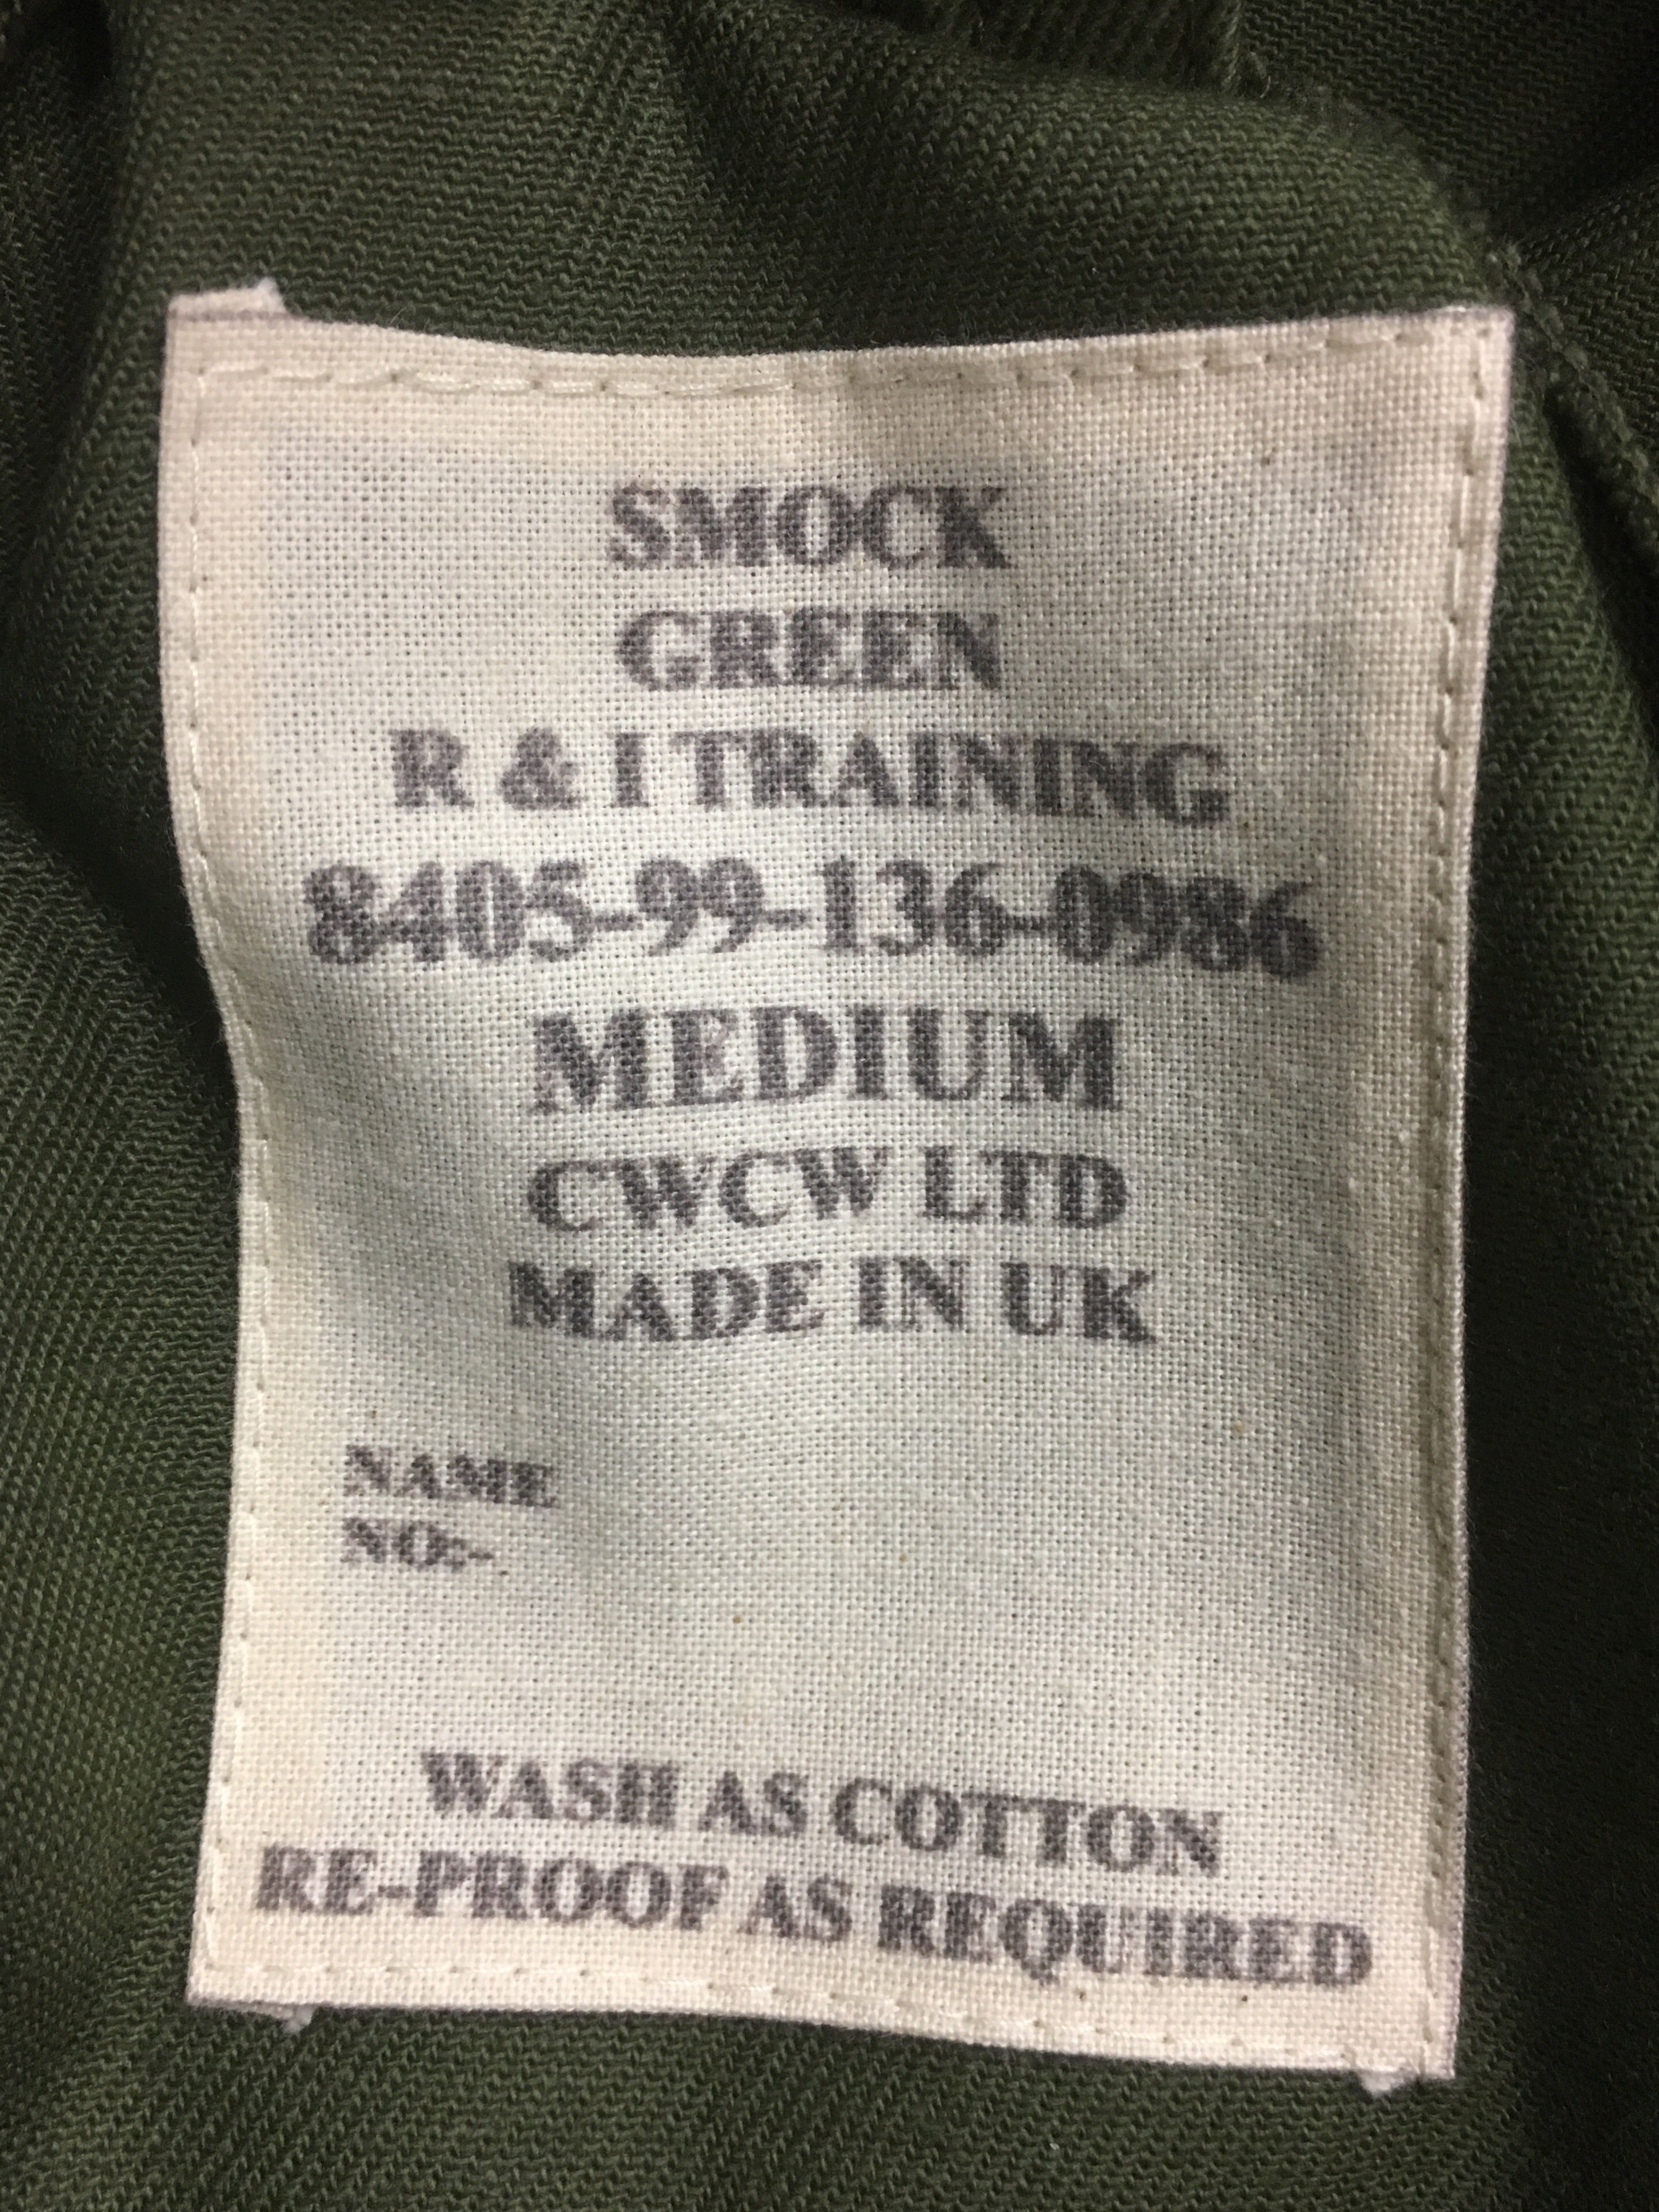 R AND I TRAINING SMOCK GREEN - LABEL